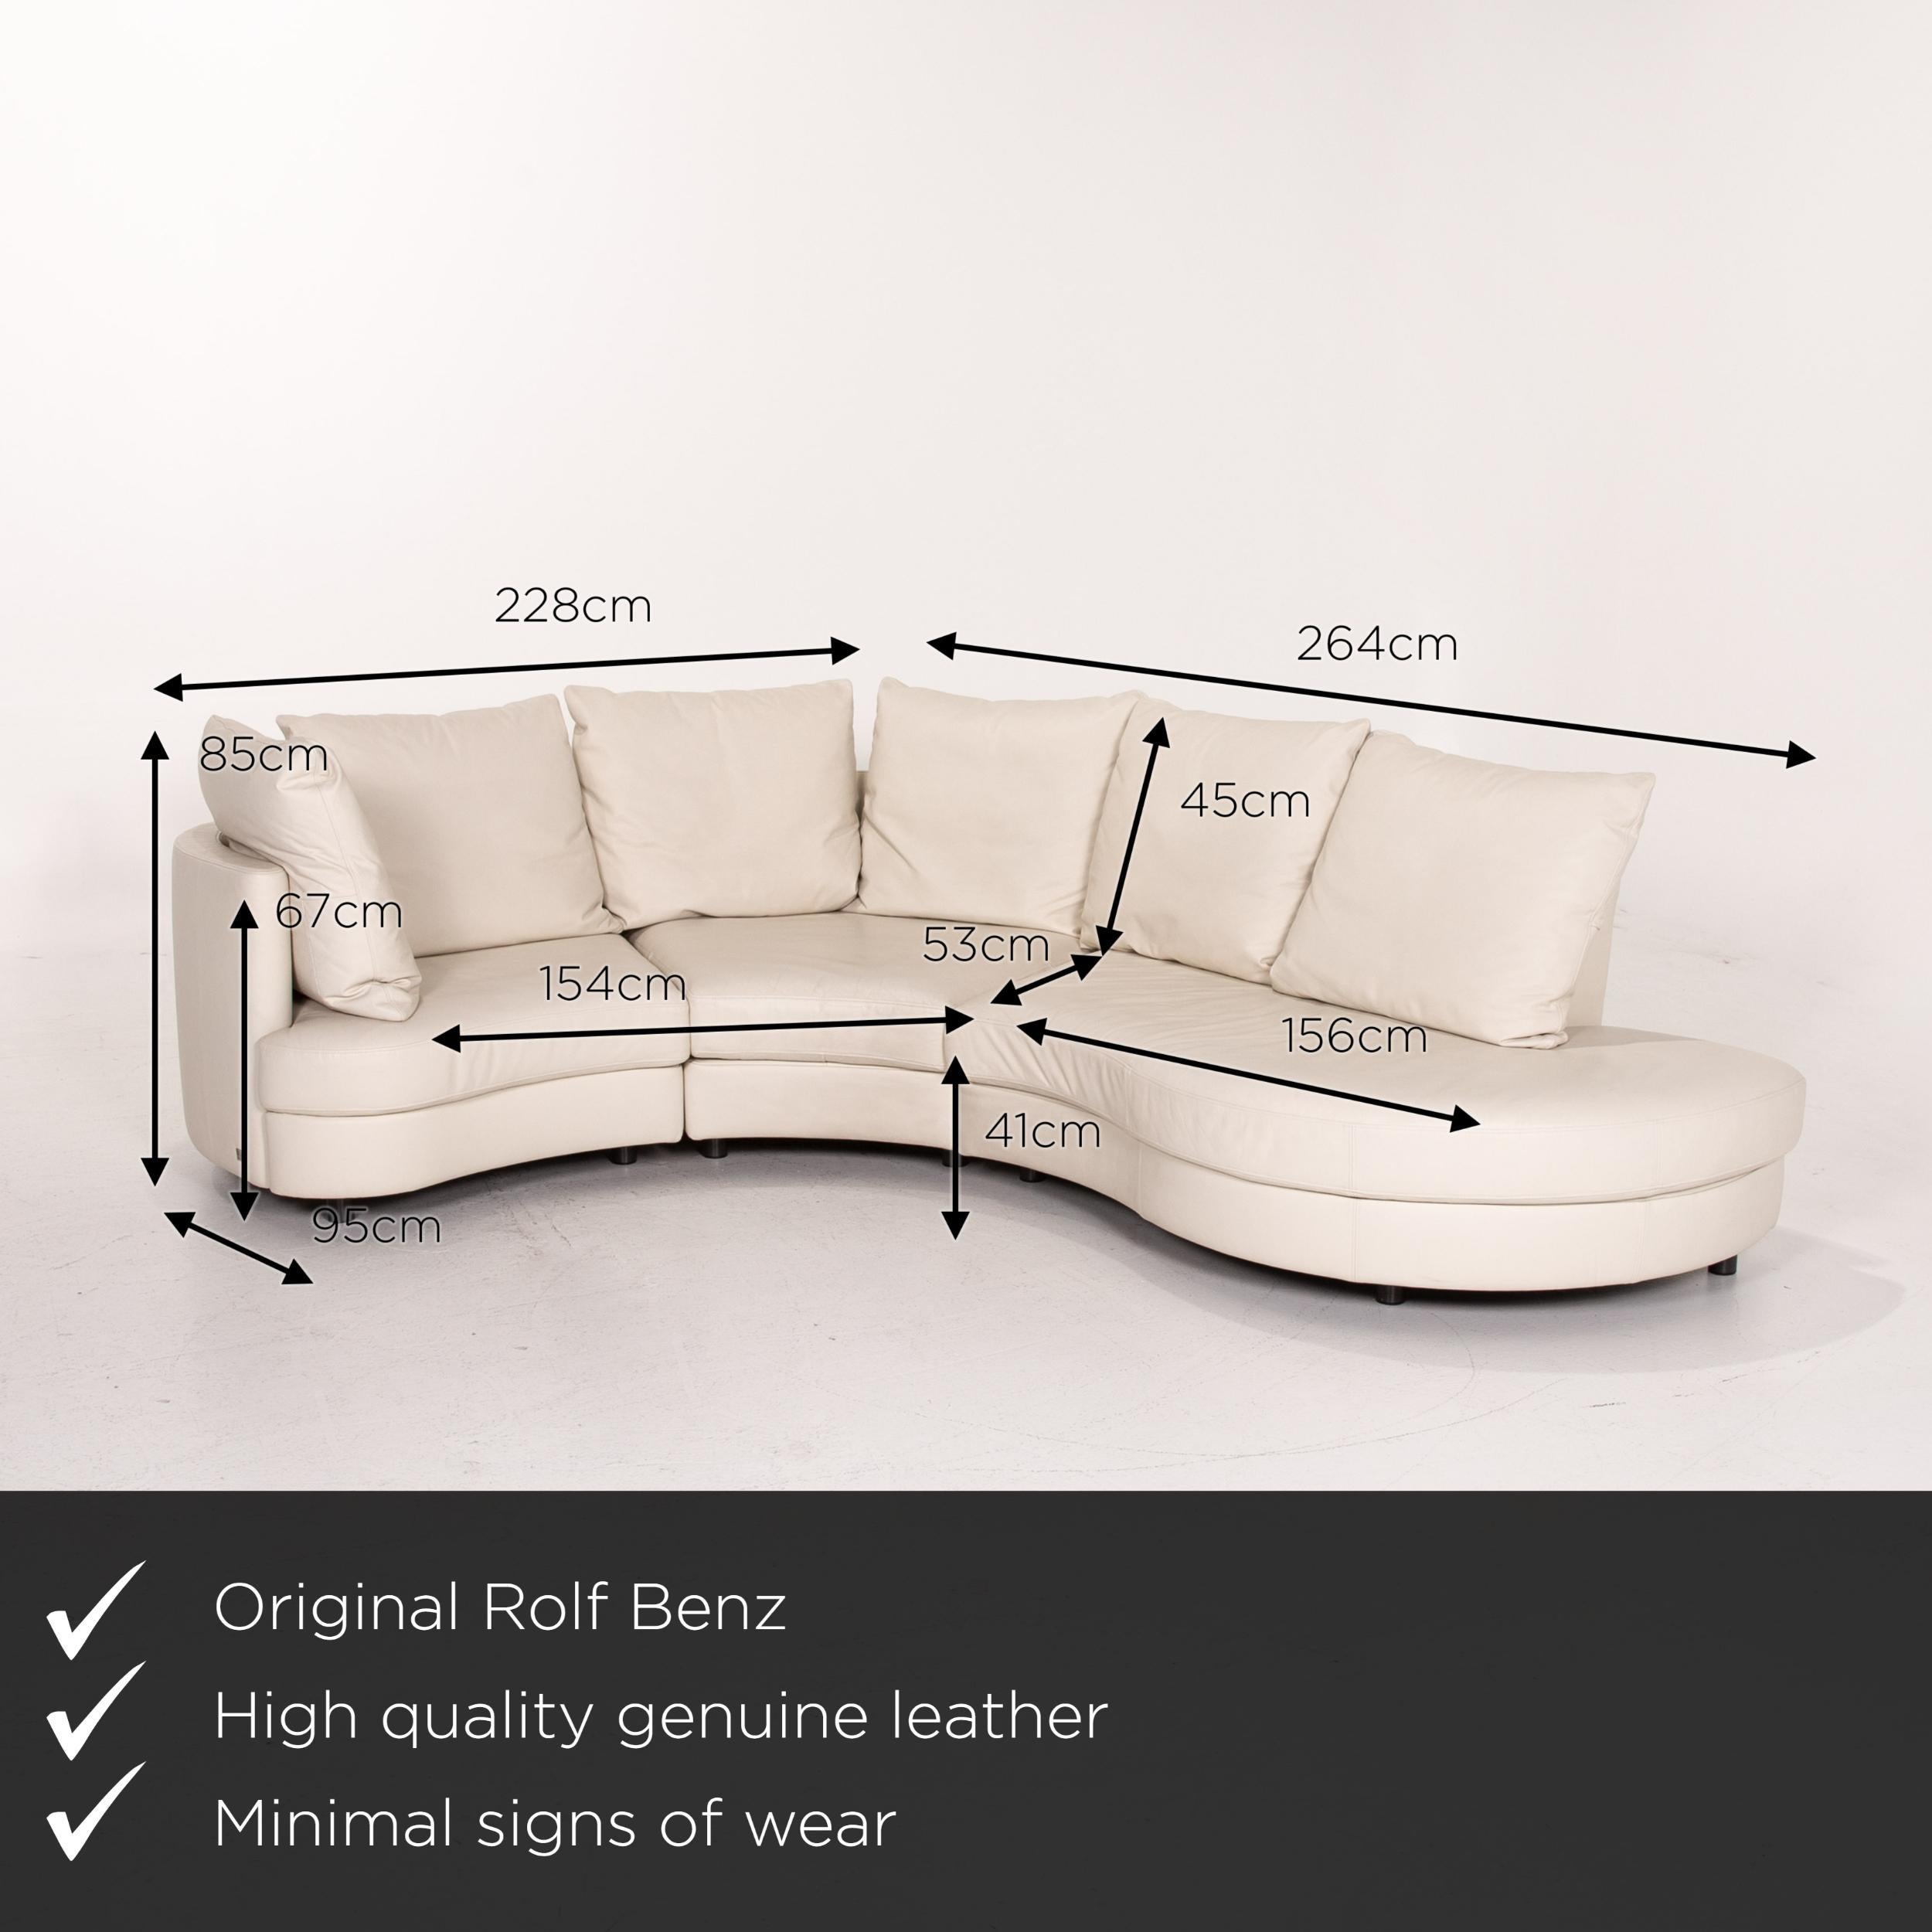 We present to you a Rolf Benz leather corner sofa cream sofa couch.
   
 

 Product measurements in centimeters:
 

Depth 95
Width 228
Height 85
Seat height 41
Rest height 67
Seat depth 53
Seat width 154
Back height 45.